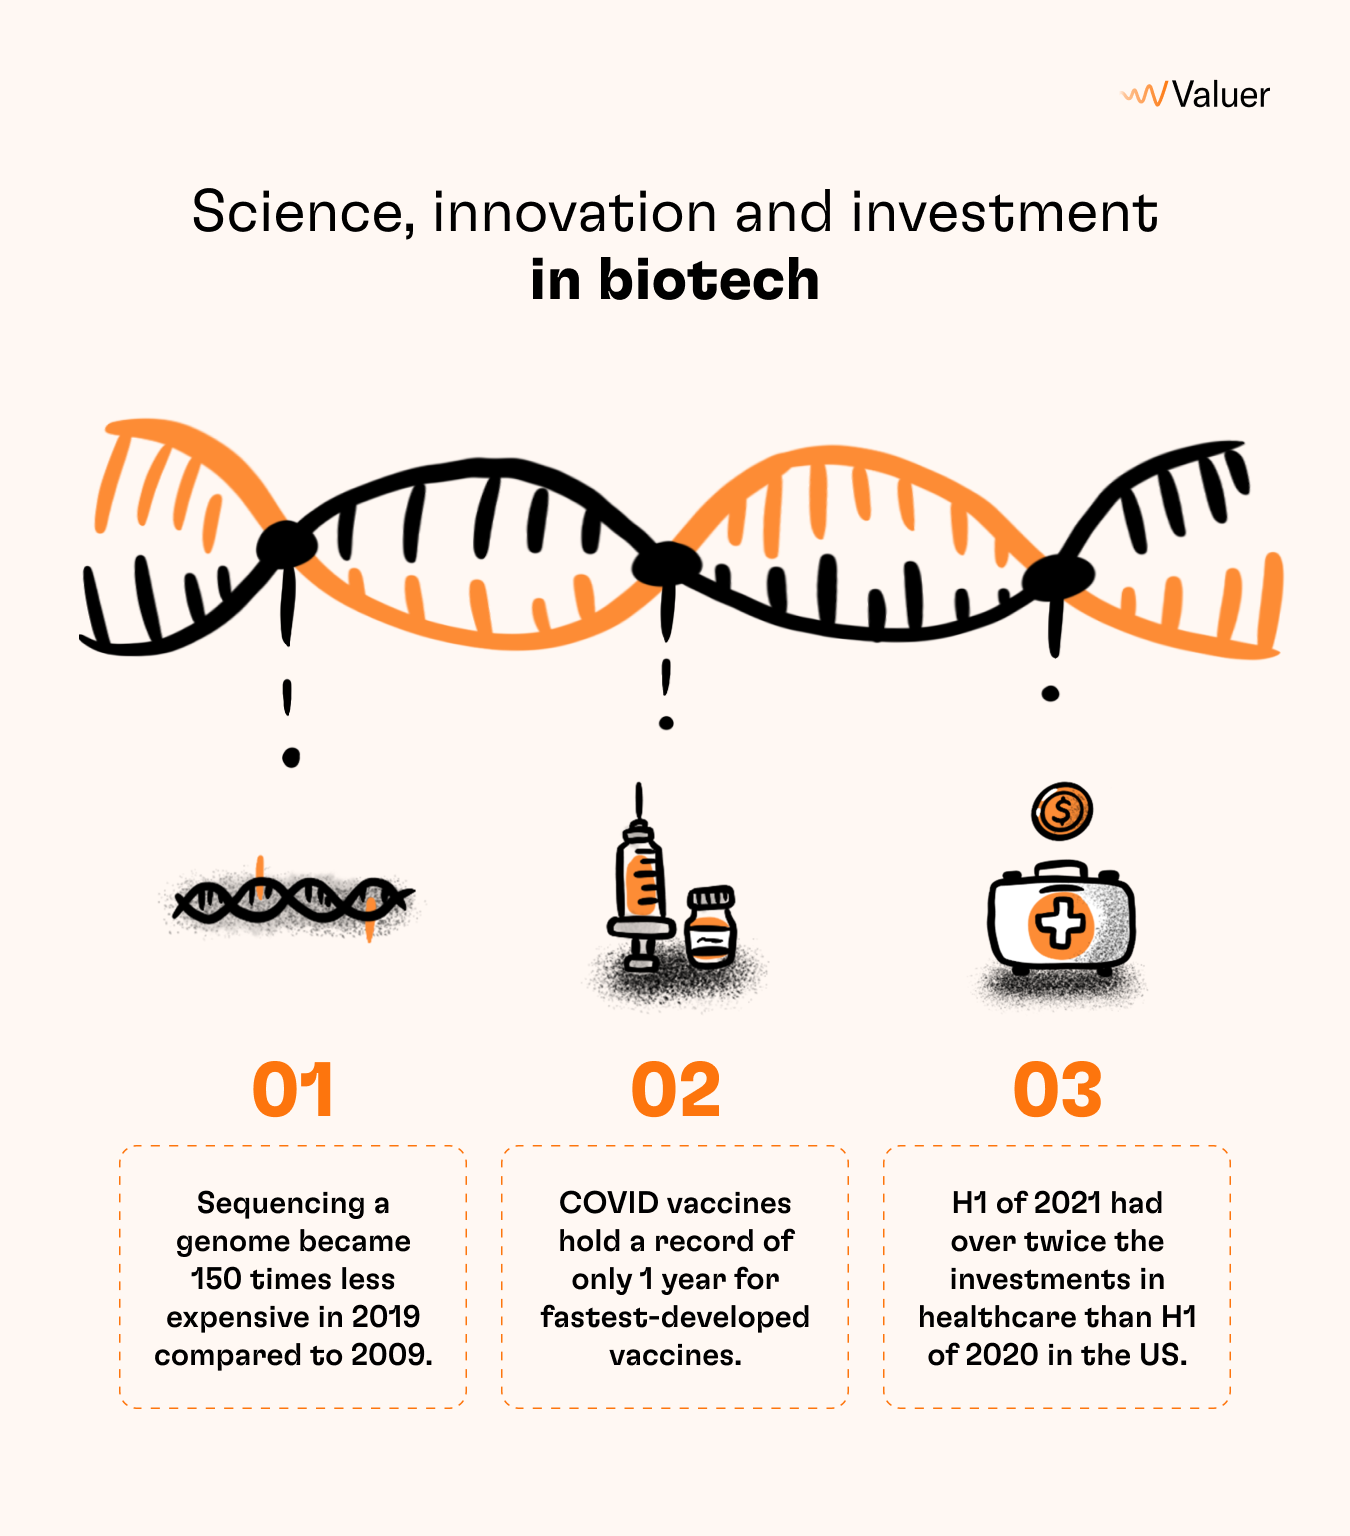 Science, innovation and investment in biotech